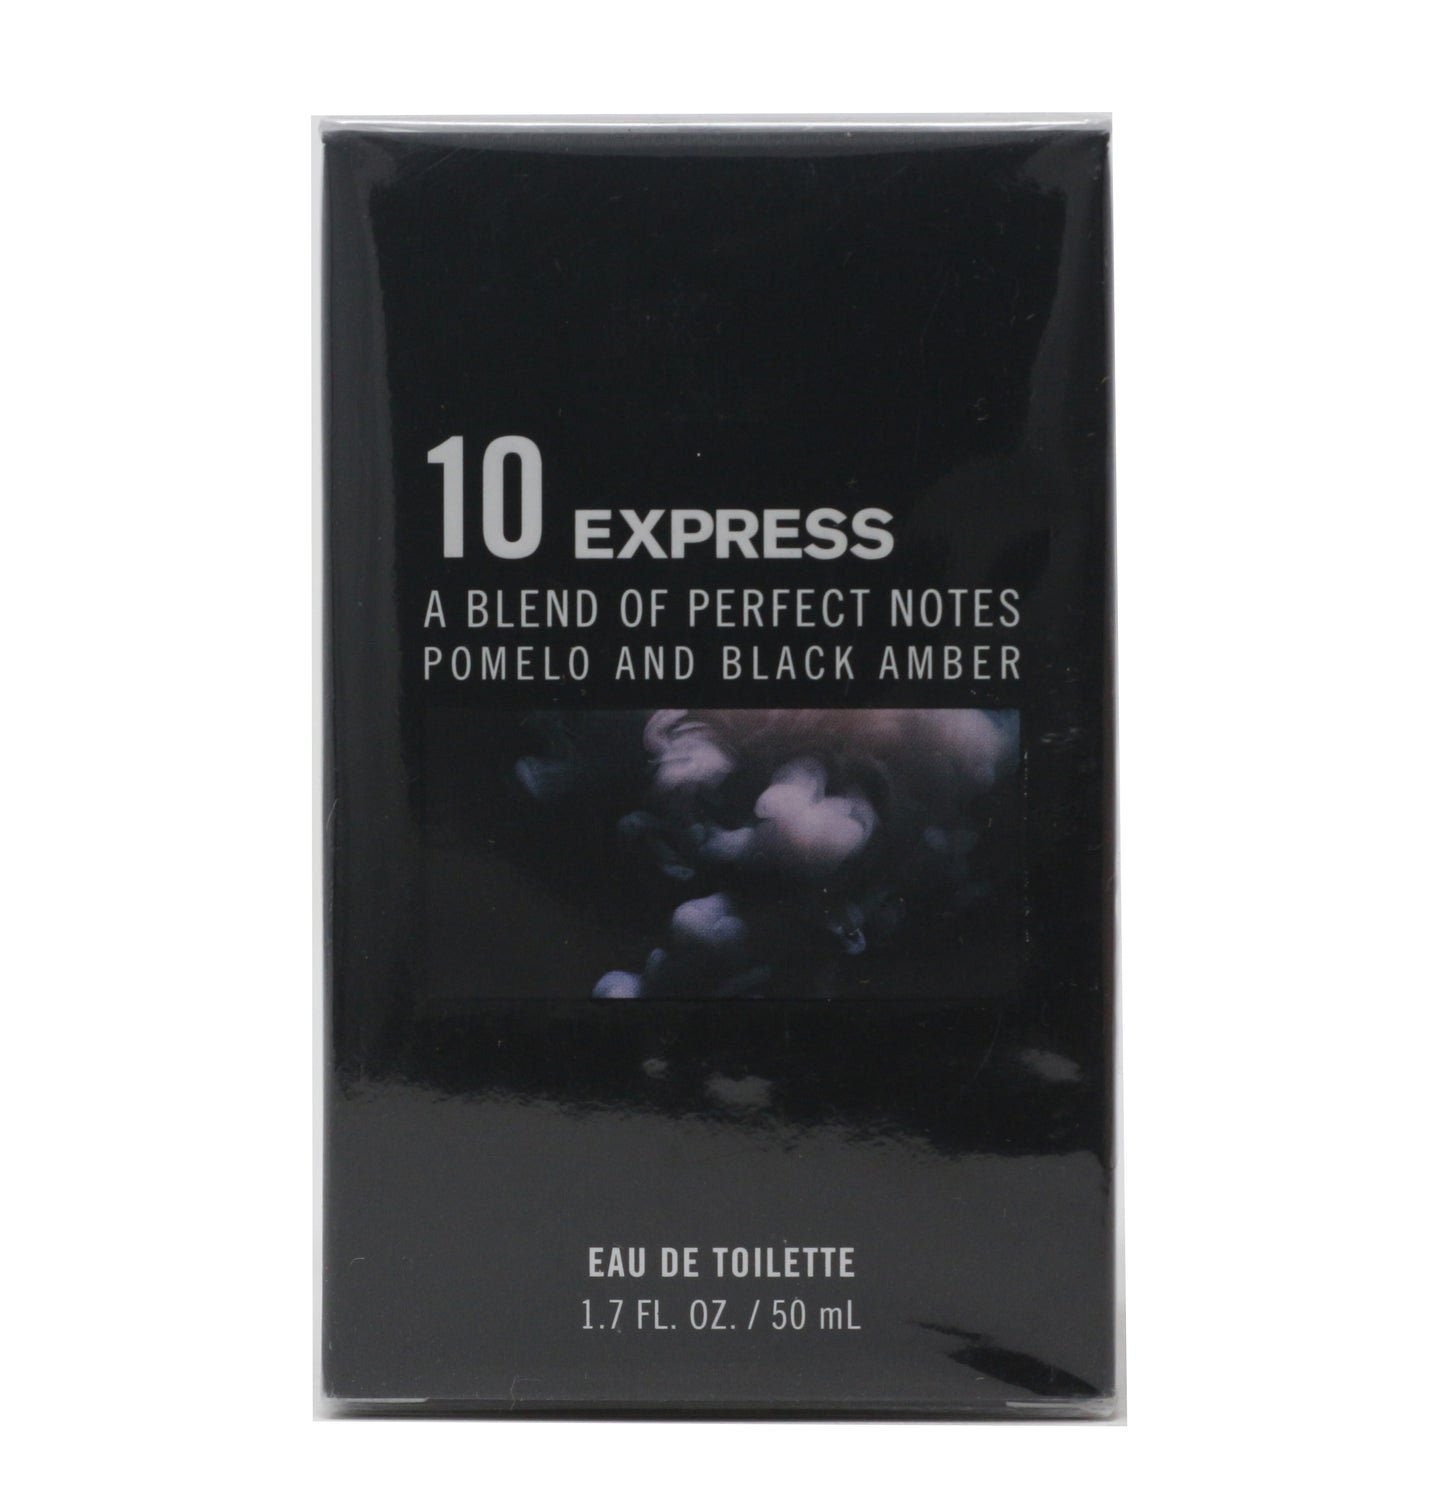 Express 10 A Blend Of Perfect Notes Pomele And Black Amber EDT 1.7oz New InBox